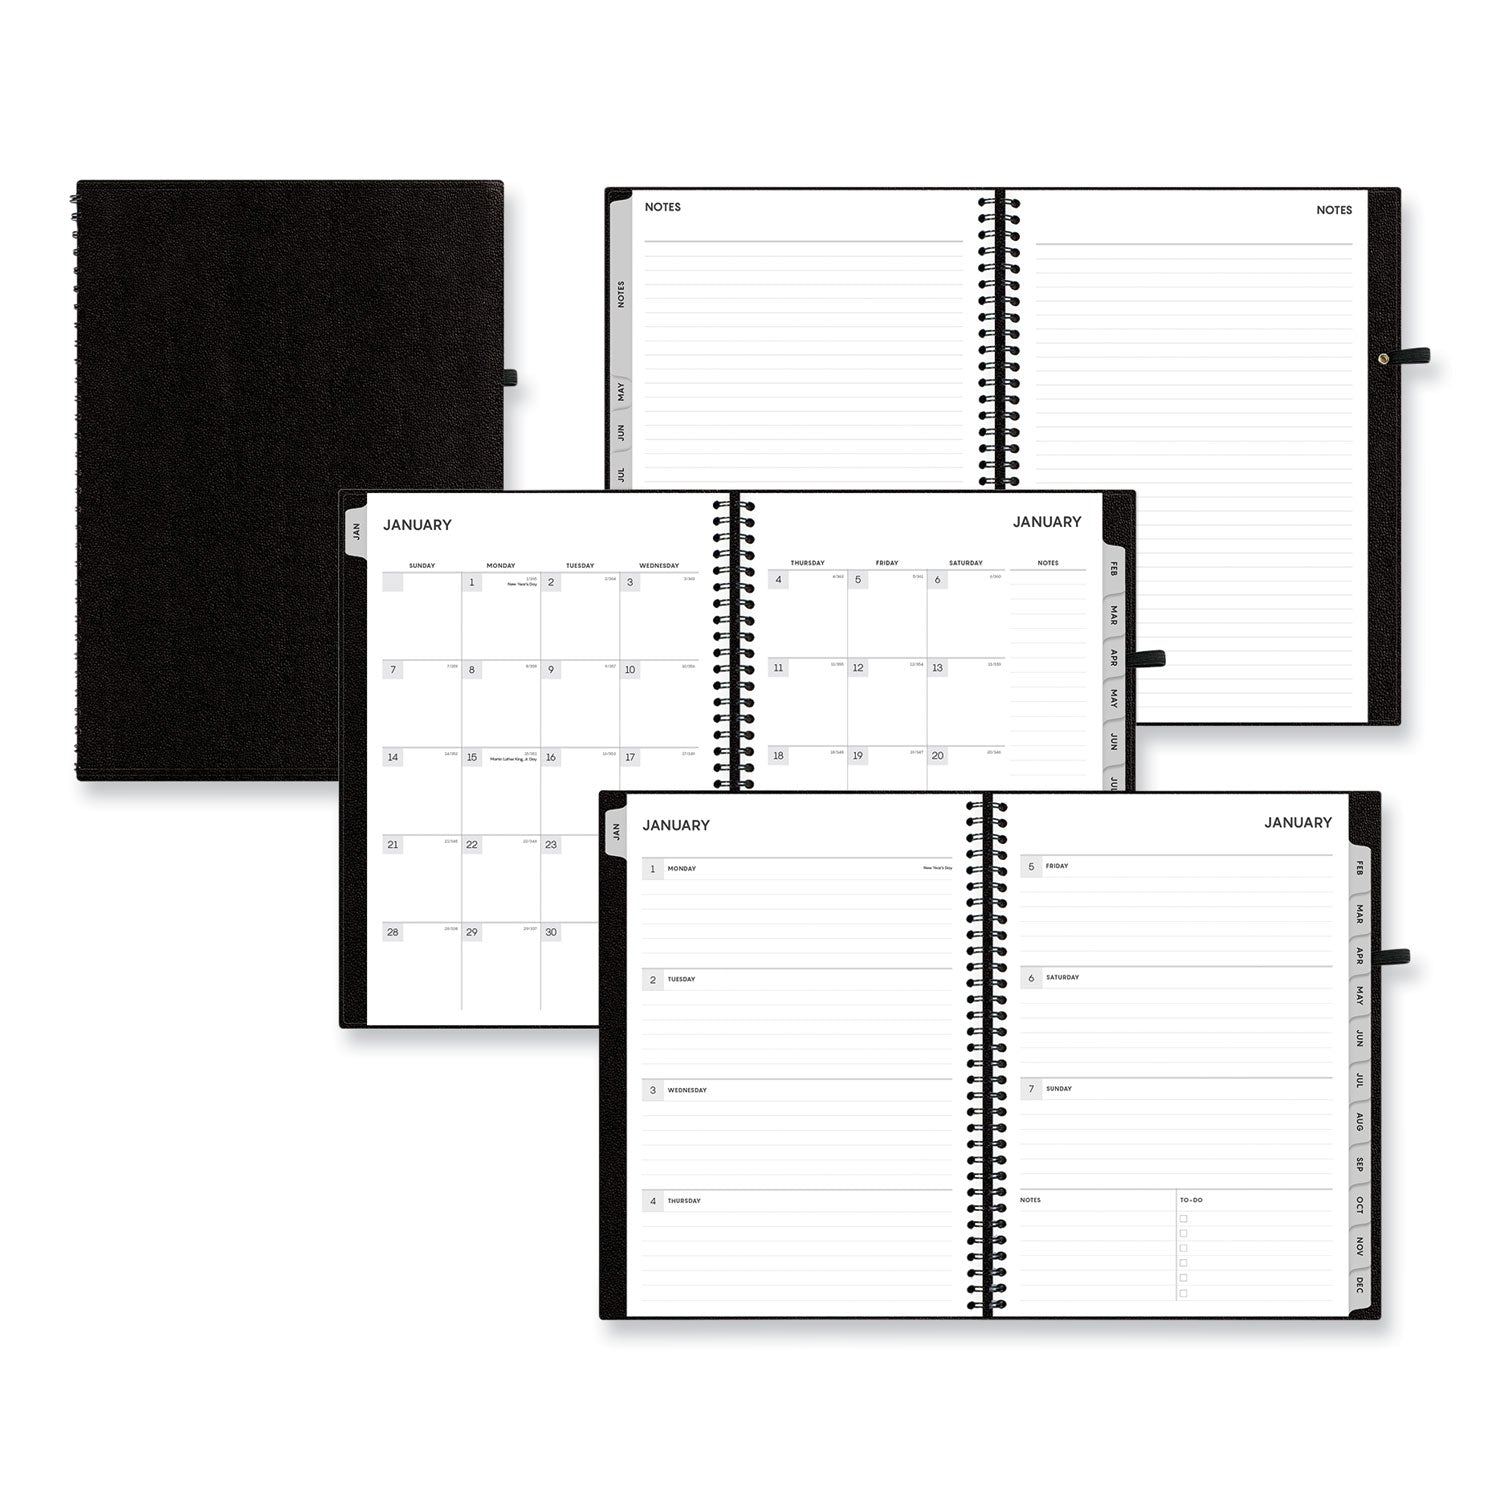 aligned-weekly-monthly-notes-planner-8-x-5-black-cover-12-month-jan-to-dec-2024_bls143587 - 1